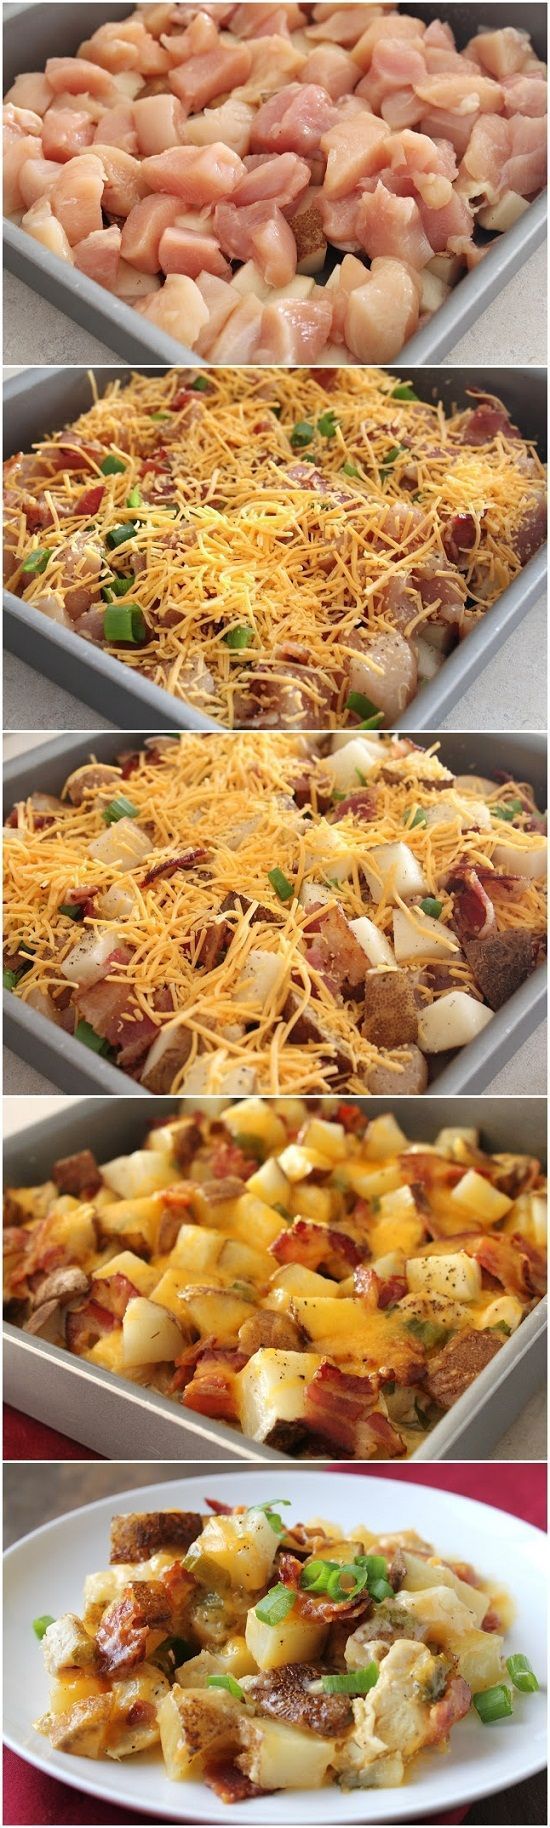 Loaded baked potato and chicken casserole. Quick and easy, feeds the whole family! #dinner #dinner_recipes_easy